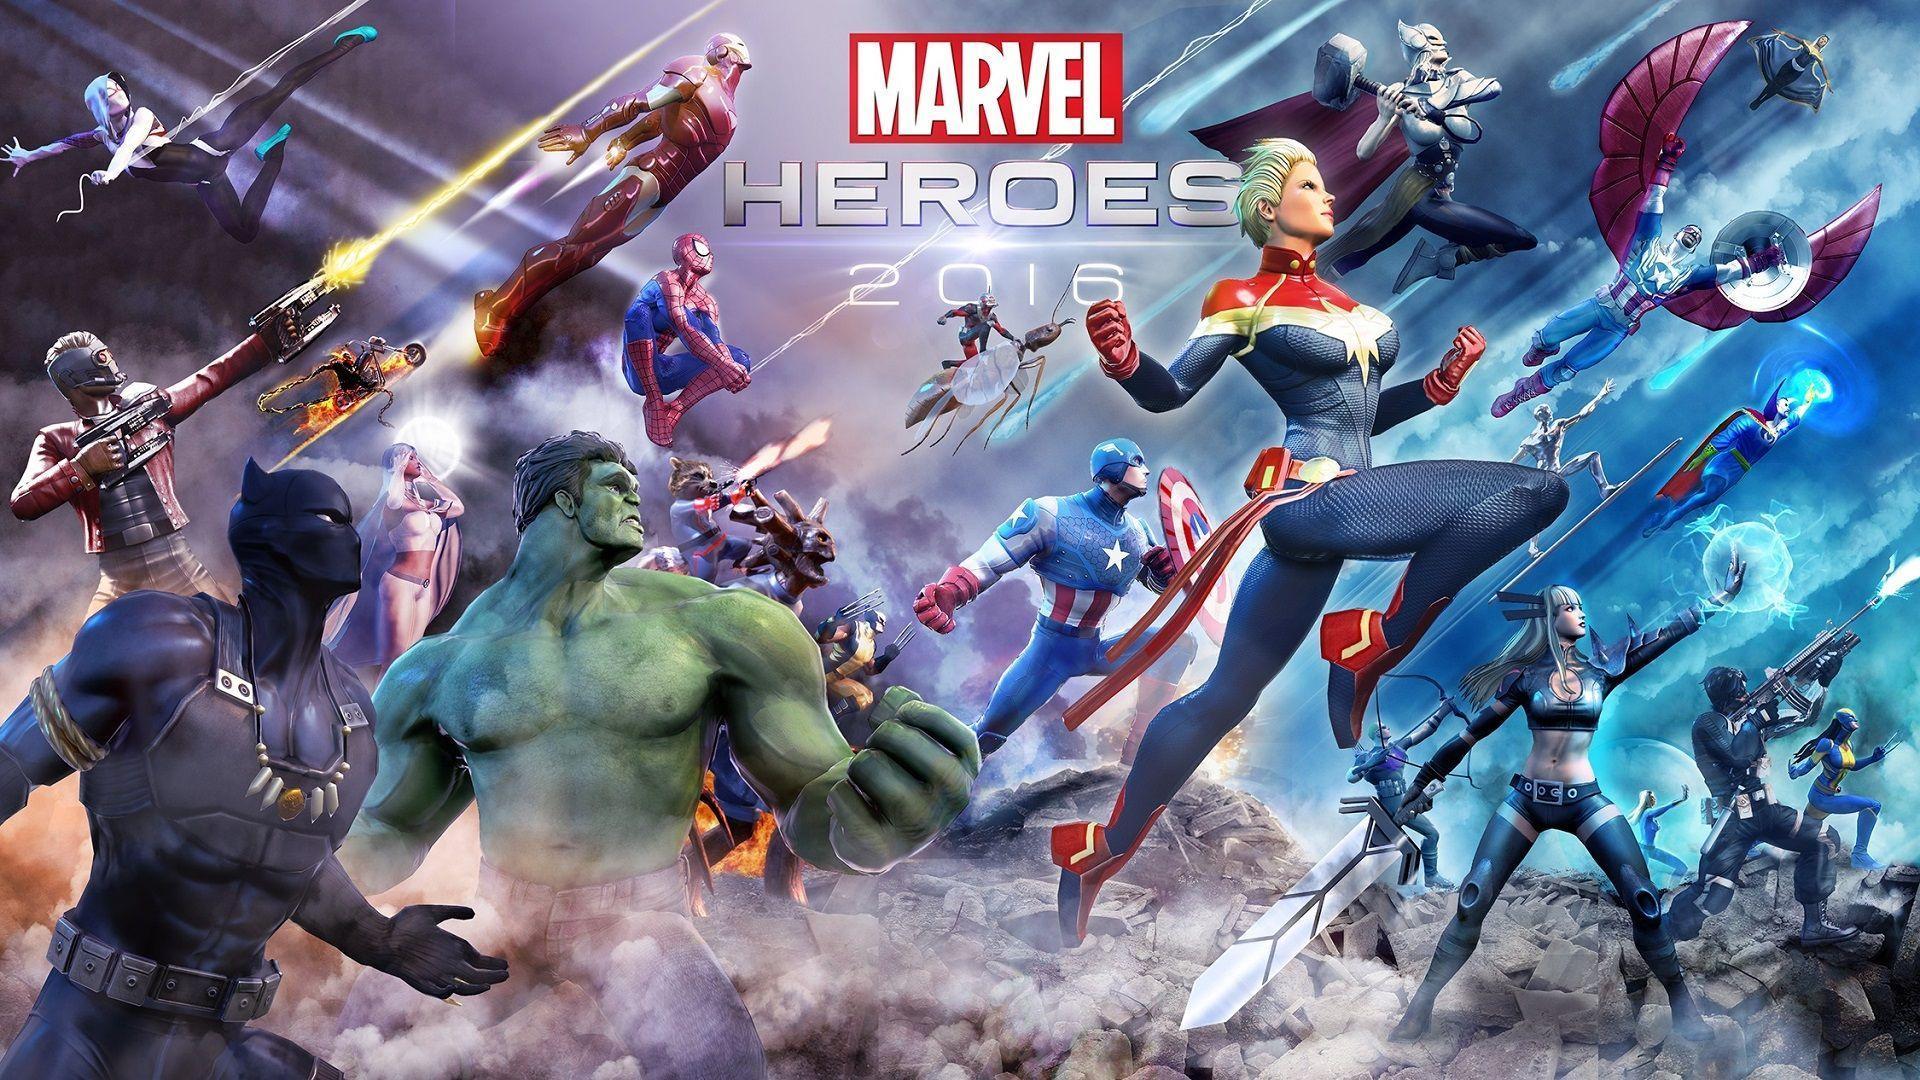 Could someone Photohop the Marvel Heroes 2016 Wallpaper?